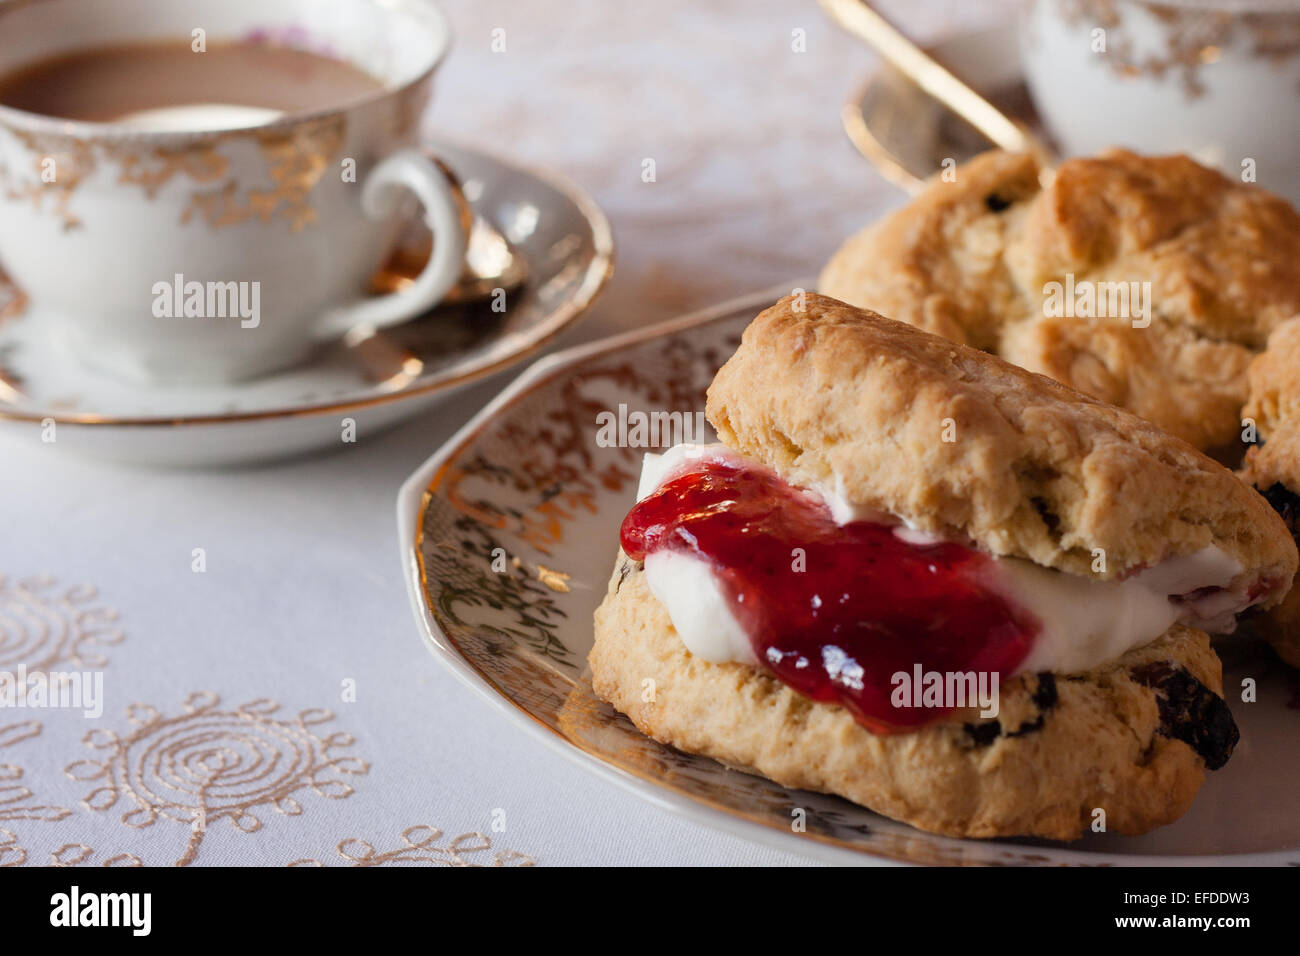 A table set for traditional English cream tea. Jam and scones naturally lit with a table cloth and fine china Stock Photo